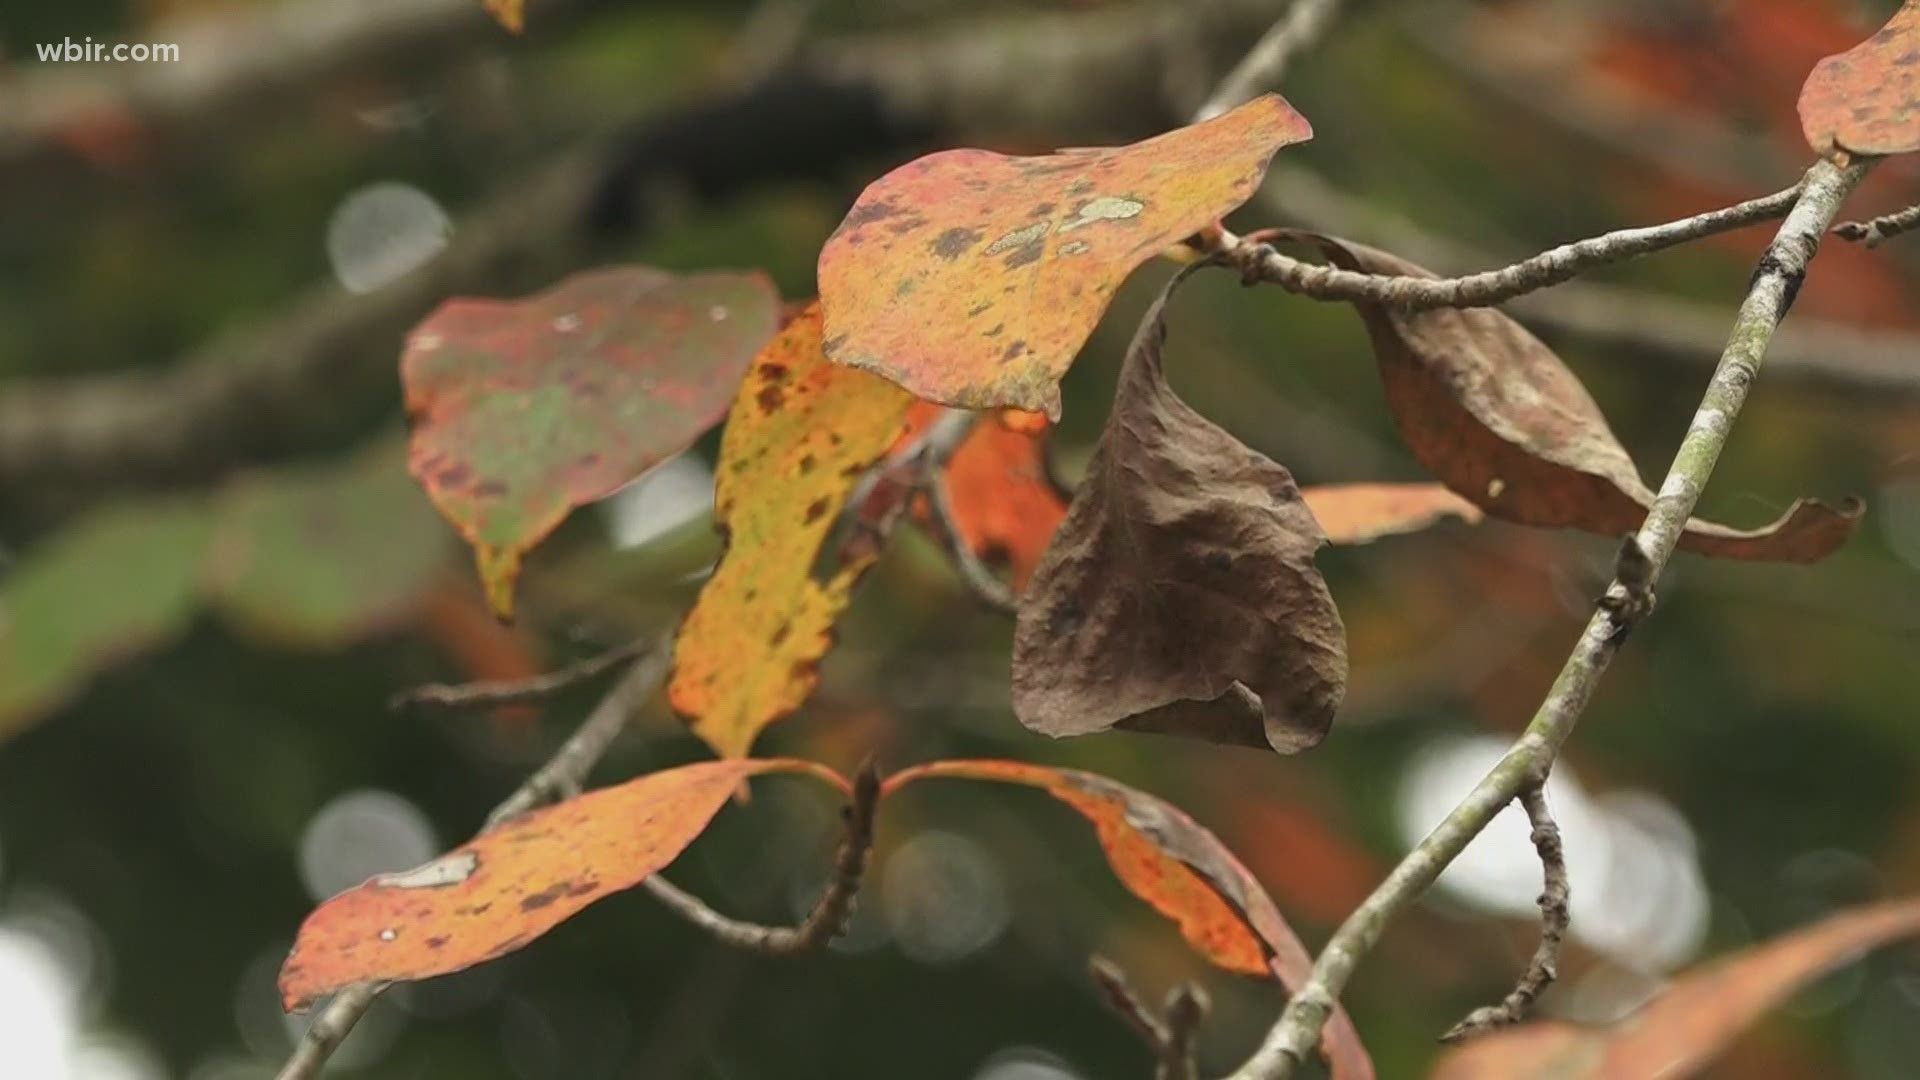 Fall colors are popping up, bringing more tourists to sevier co